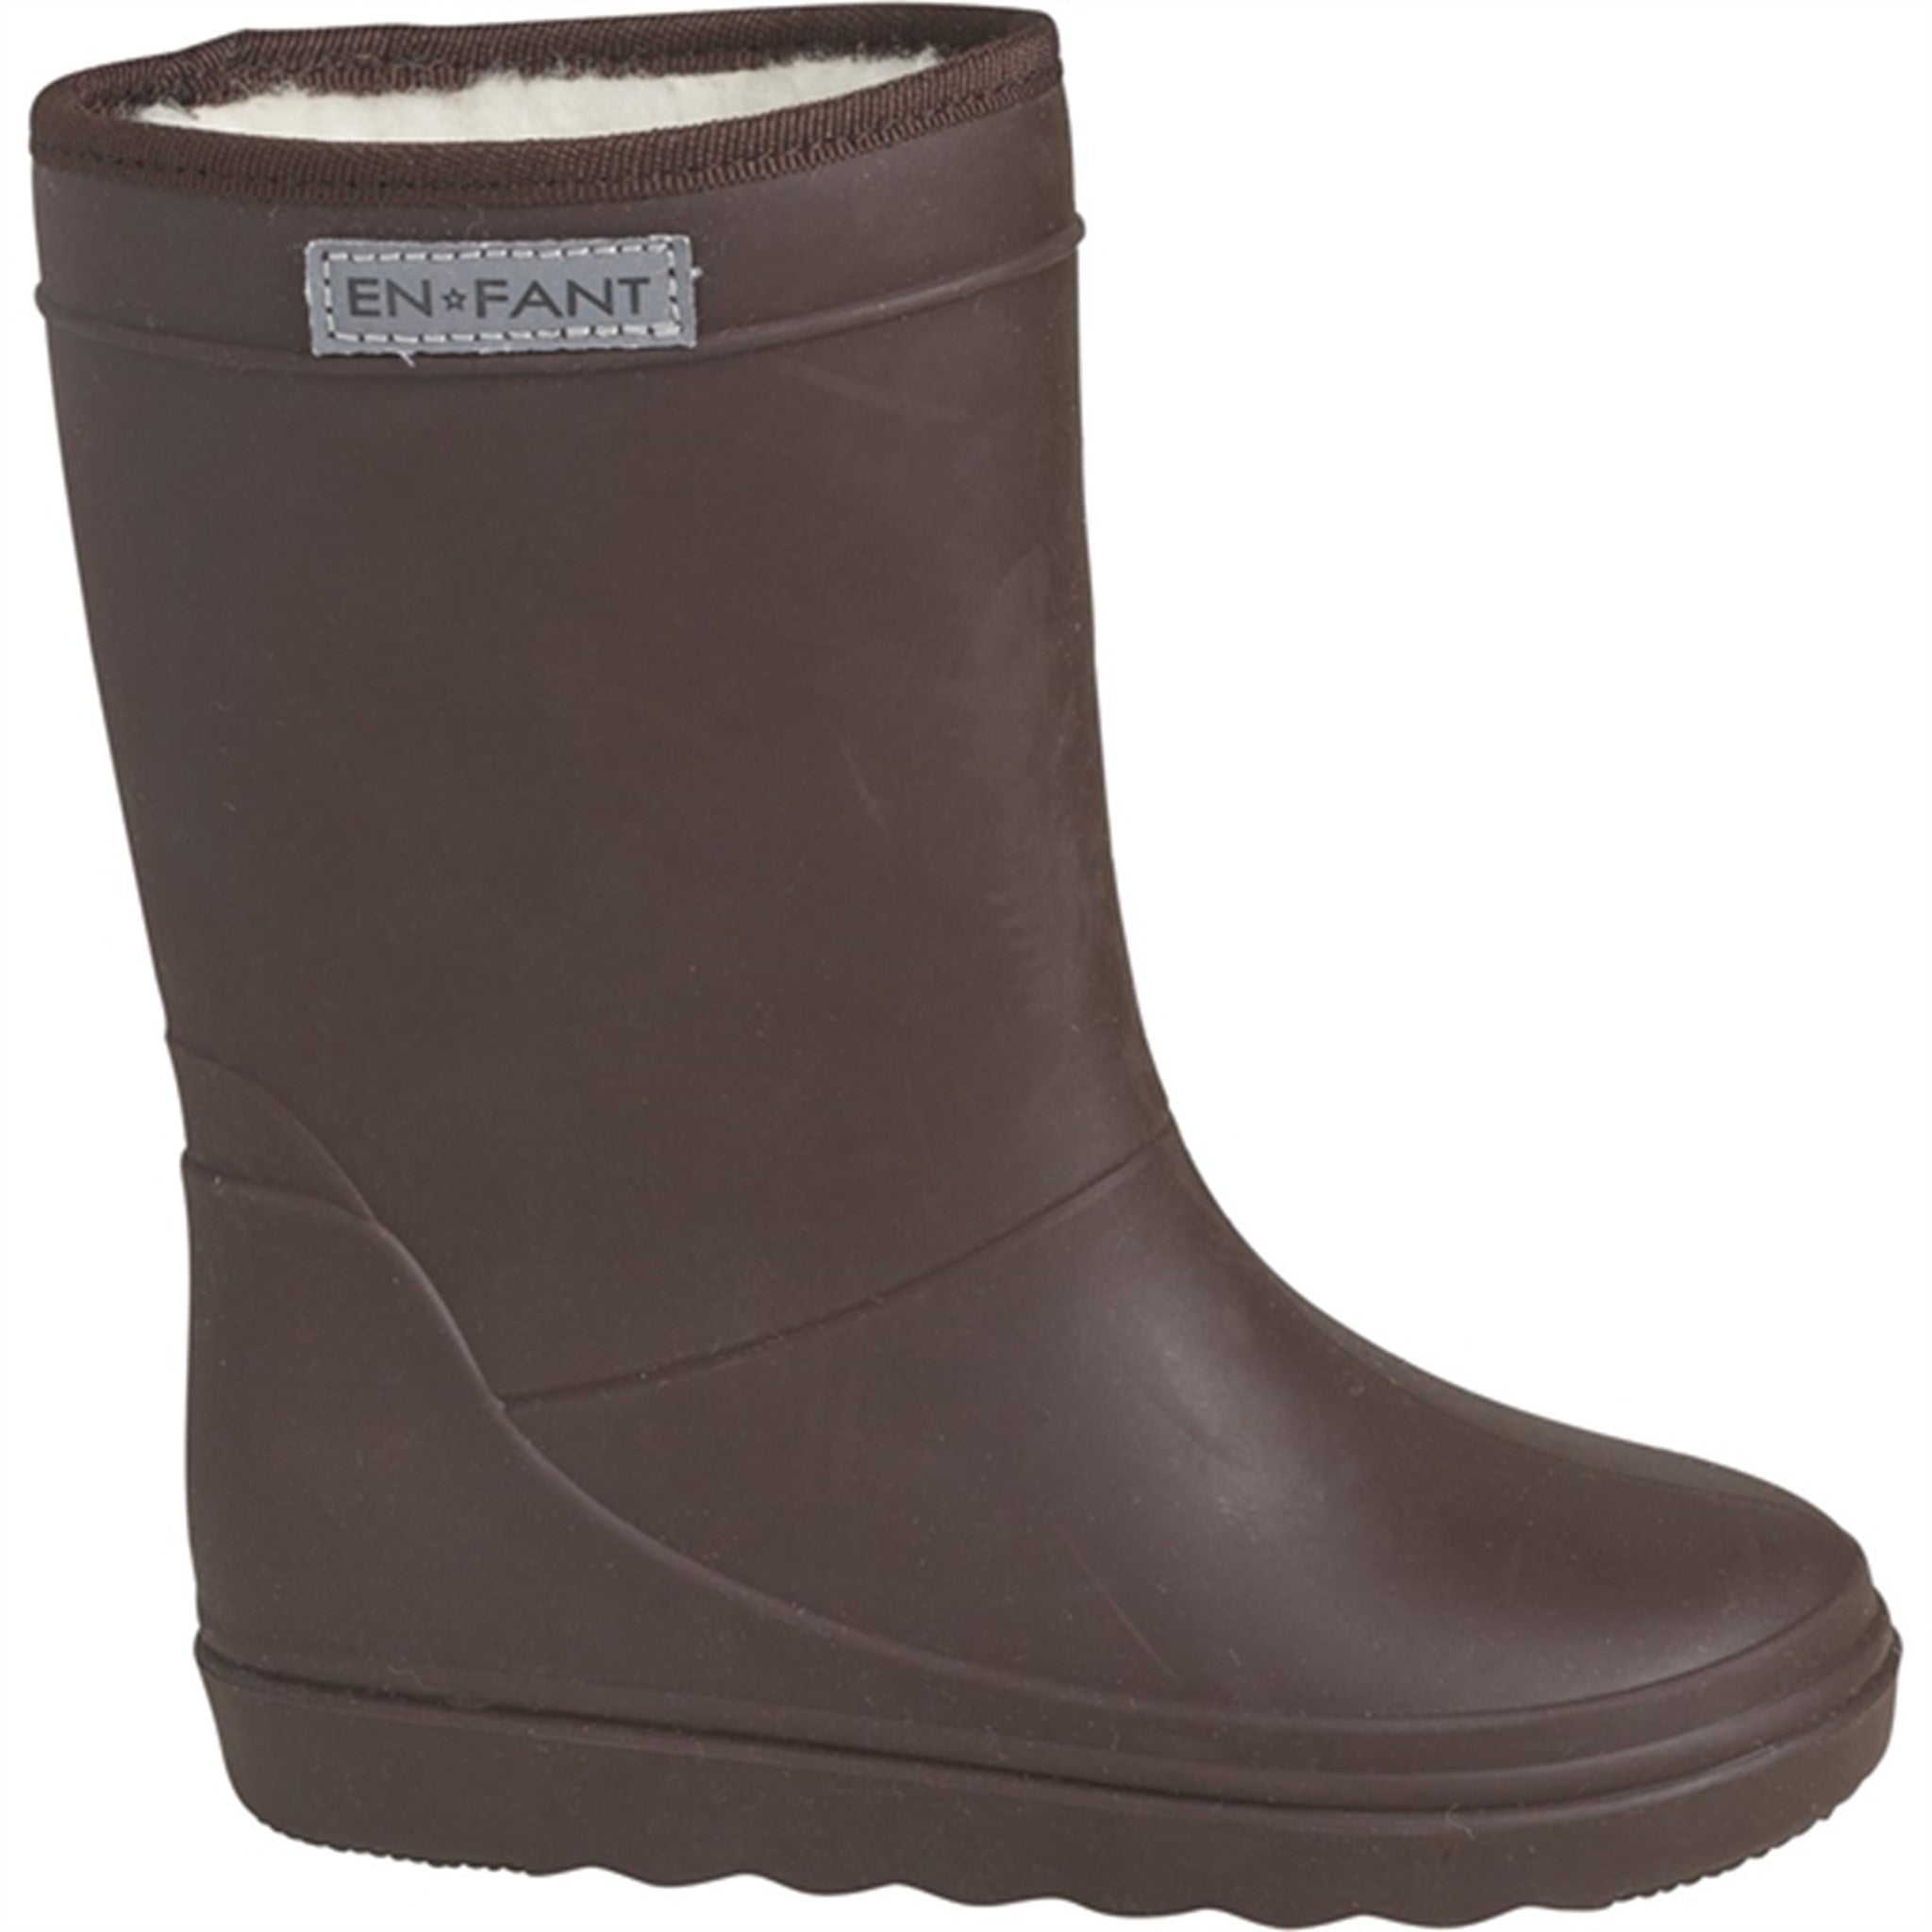 En Fant Thermo Boots Coffee Bean 2